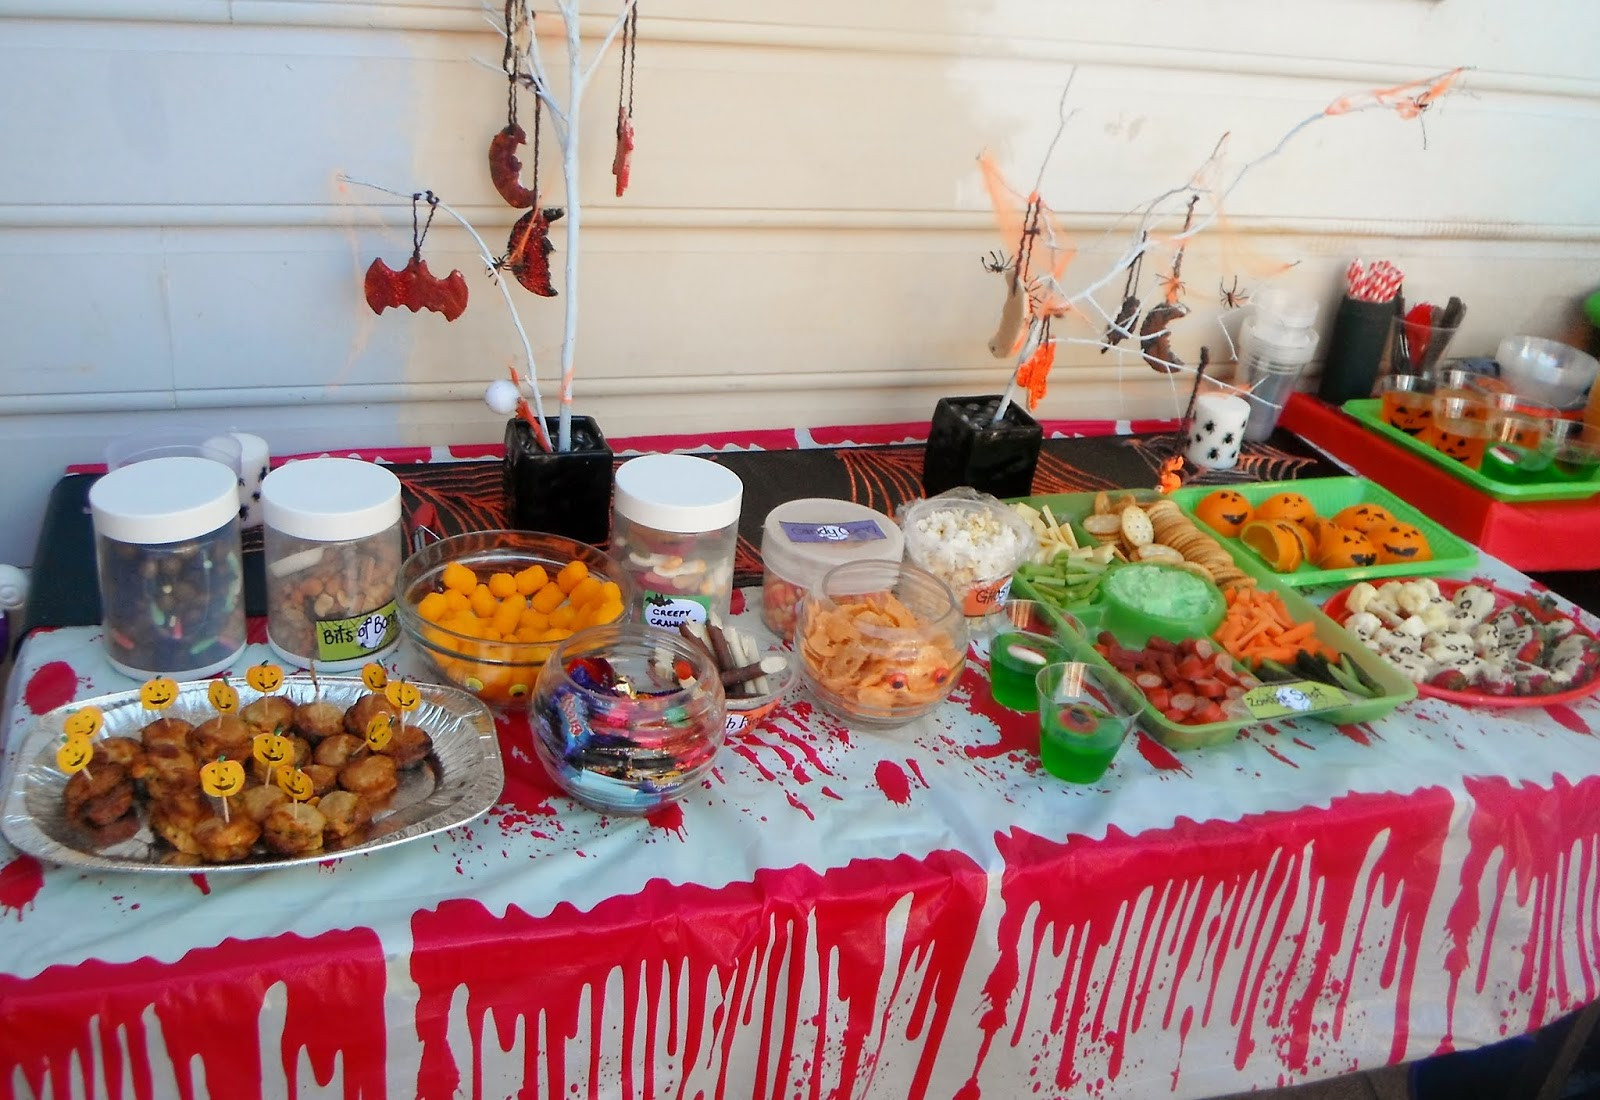 Halloween Office Party Food Ideas
 Adventures at home with Mum Halloween Party Food